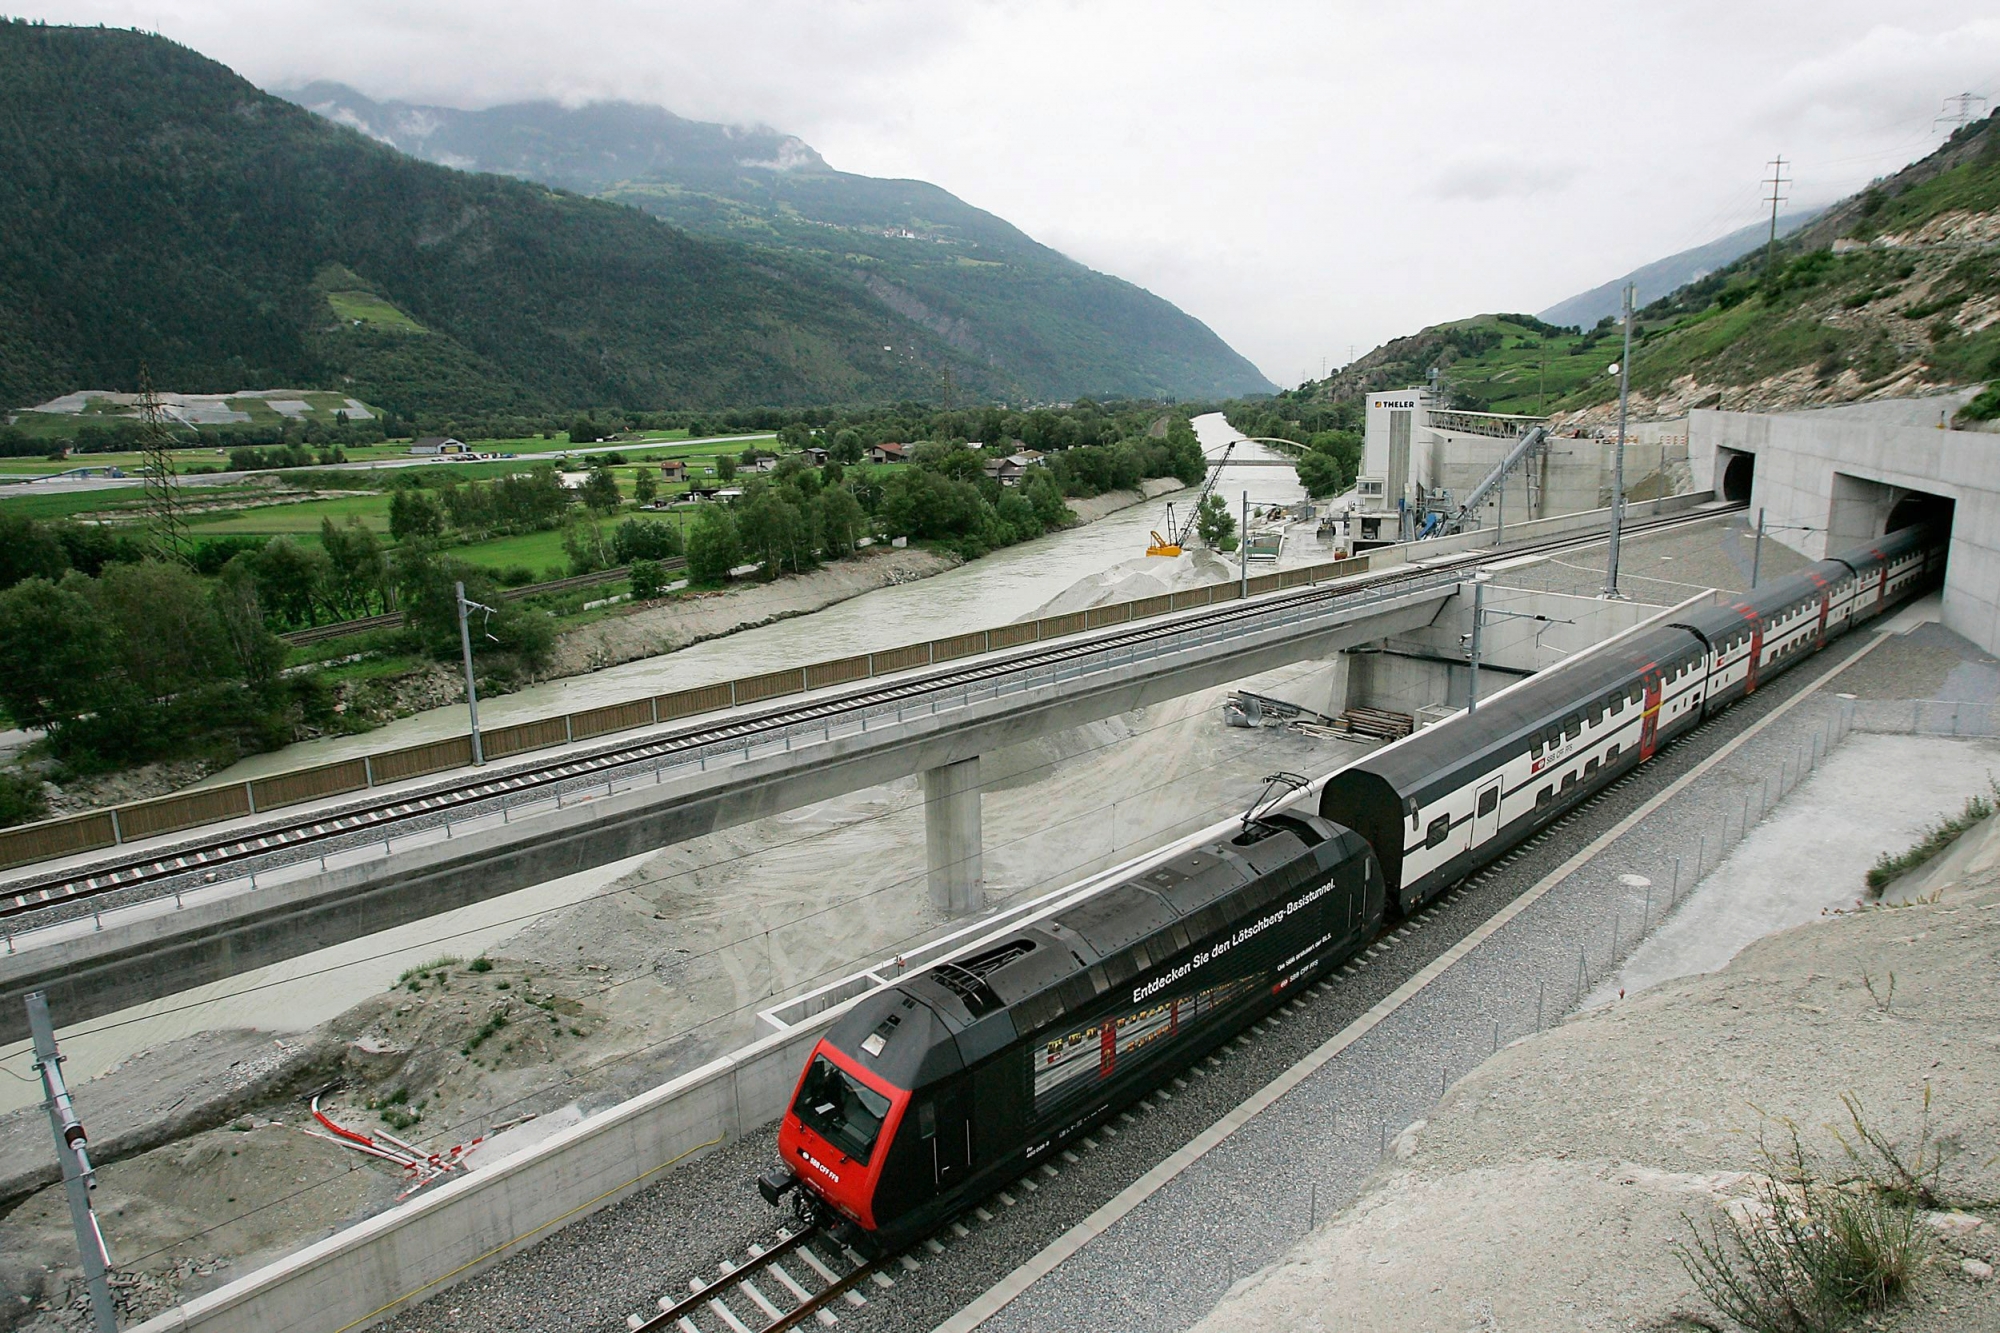 The first train passing the tunnel arrives on the south side, during the inauguration day of the Loetschberg railway Tunnel in Raron, Switzerland, Friday, June 15, 2007. The 34,6 kilometres long transalpine base tunnel between Frutigen in the canton Berne and Raron in the Canton Valais is the longest railway tunnel in Switzerland and the third longest in the World. (KEYSTONE/Olivier Maire) SWITZERLAND LOETSCHBERG TUNNEL